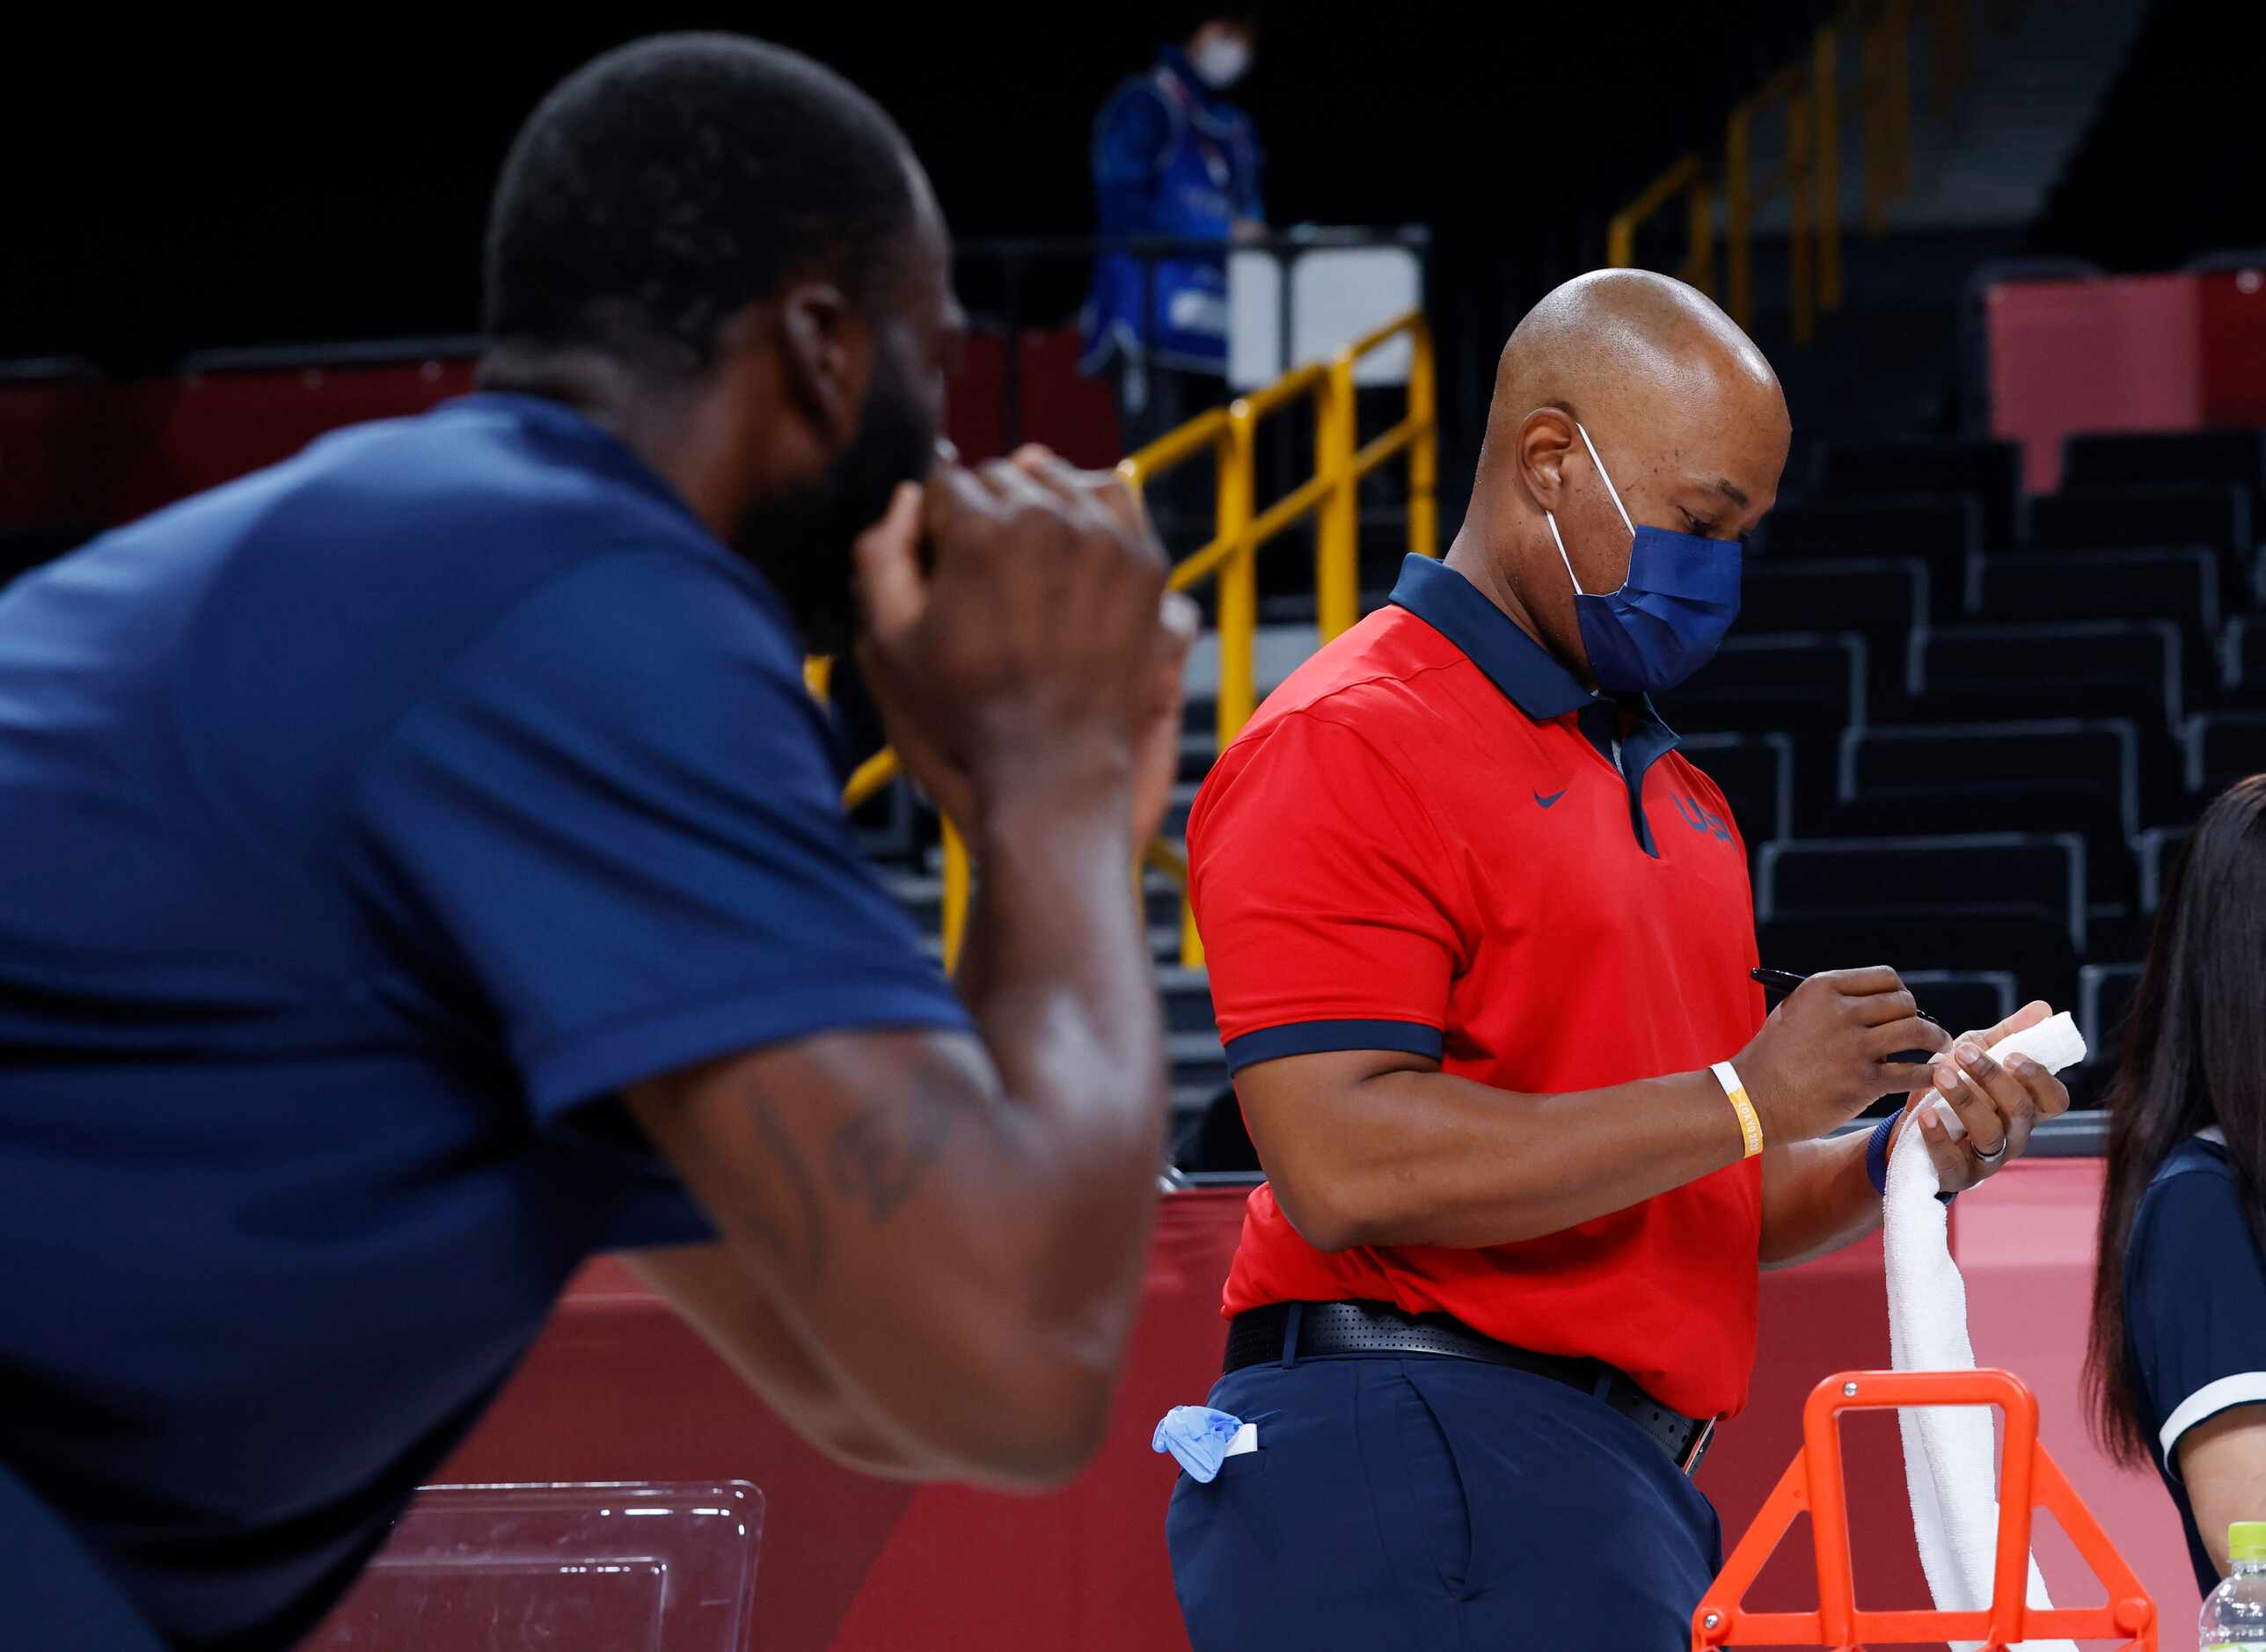 USA’s head athletic trainer Dionne Calhoun marks towels for each player as Draymond Green...